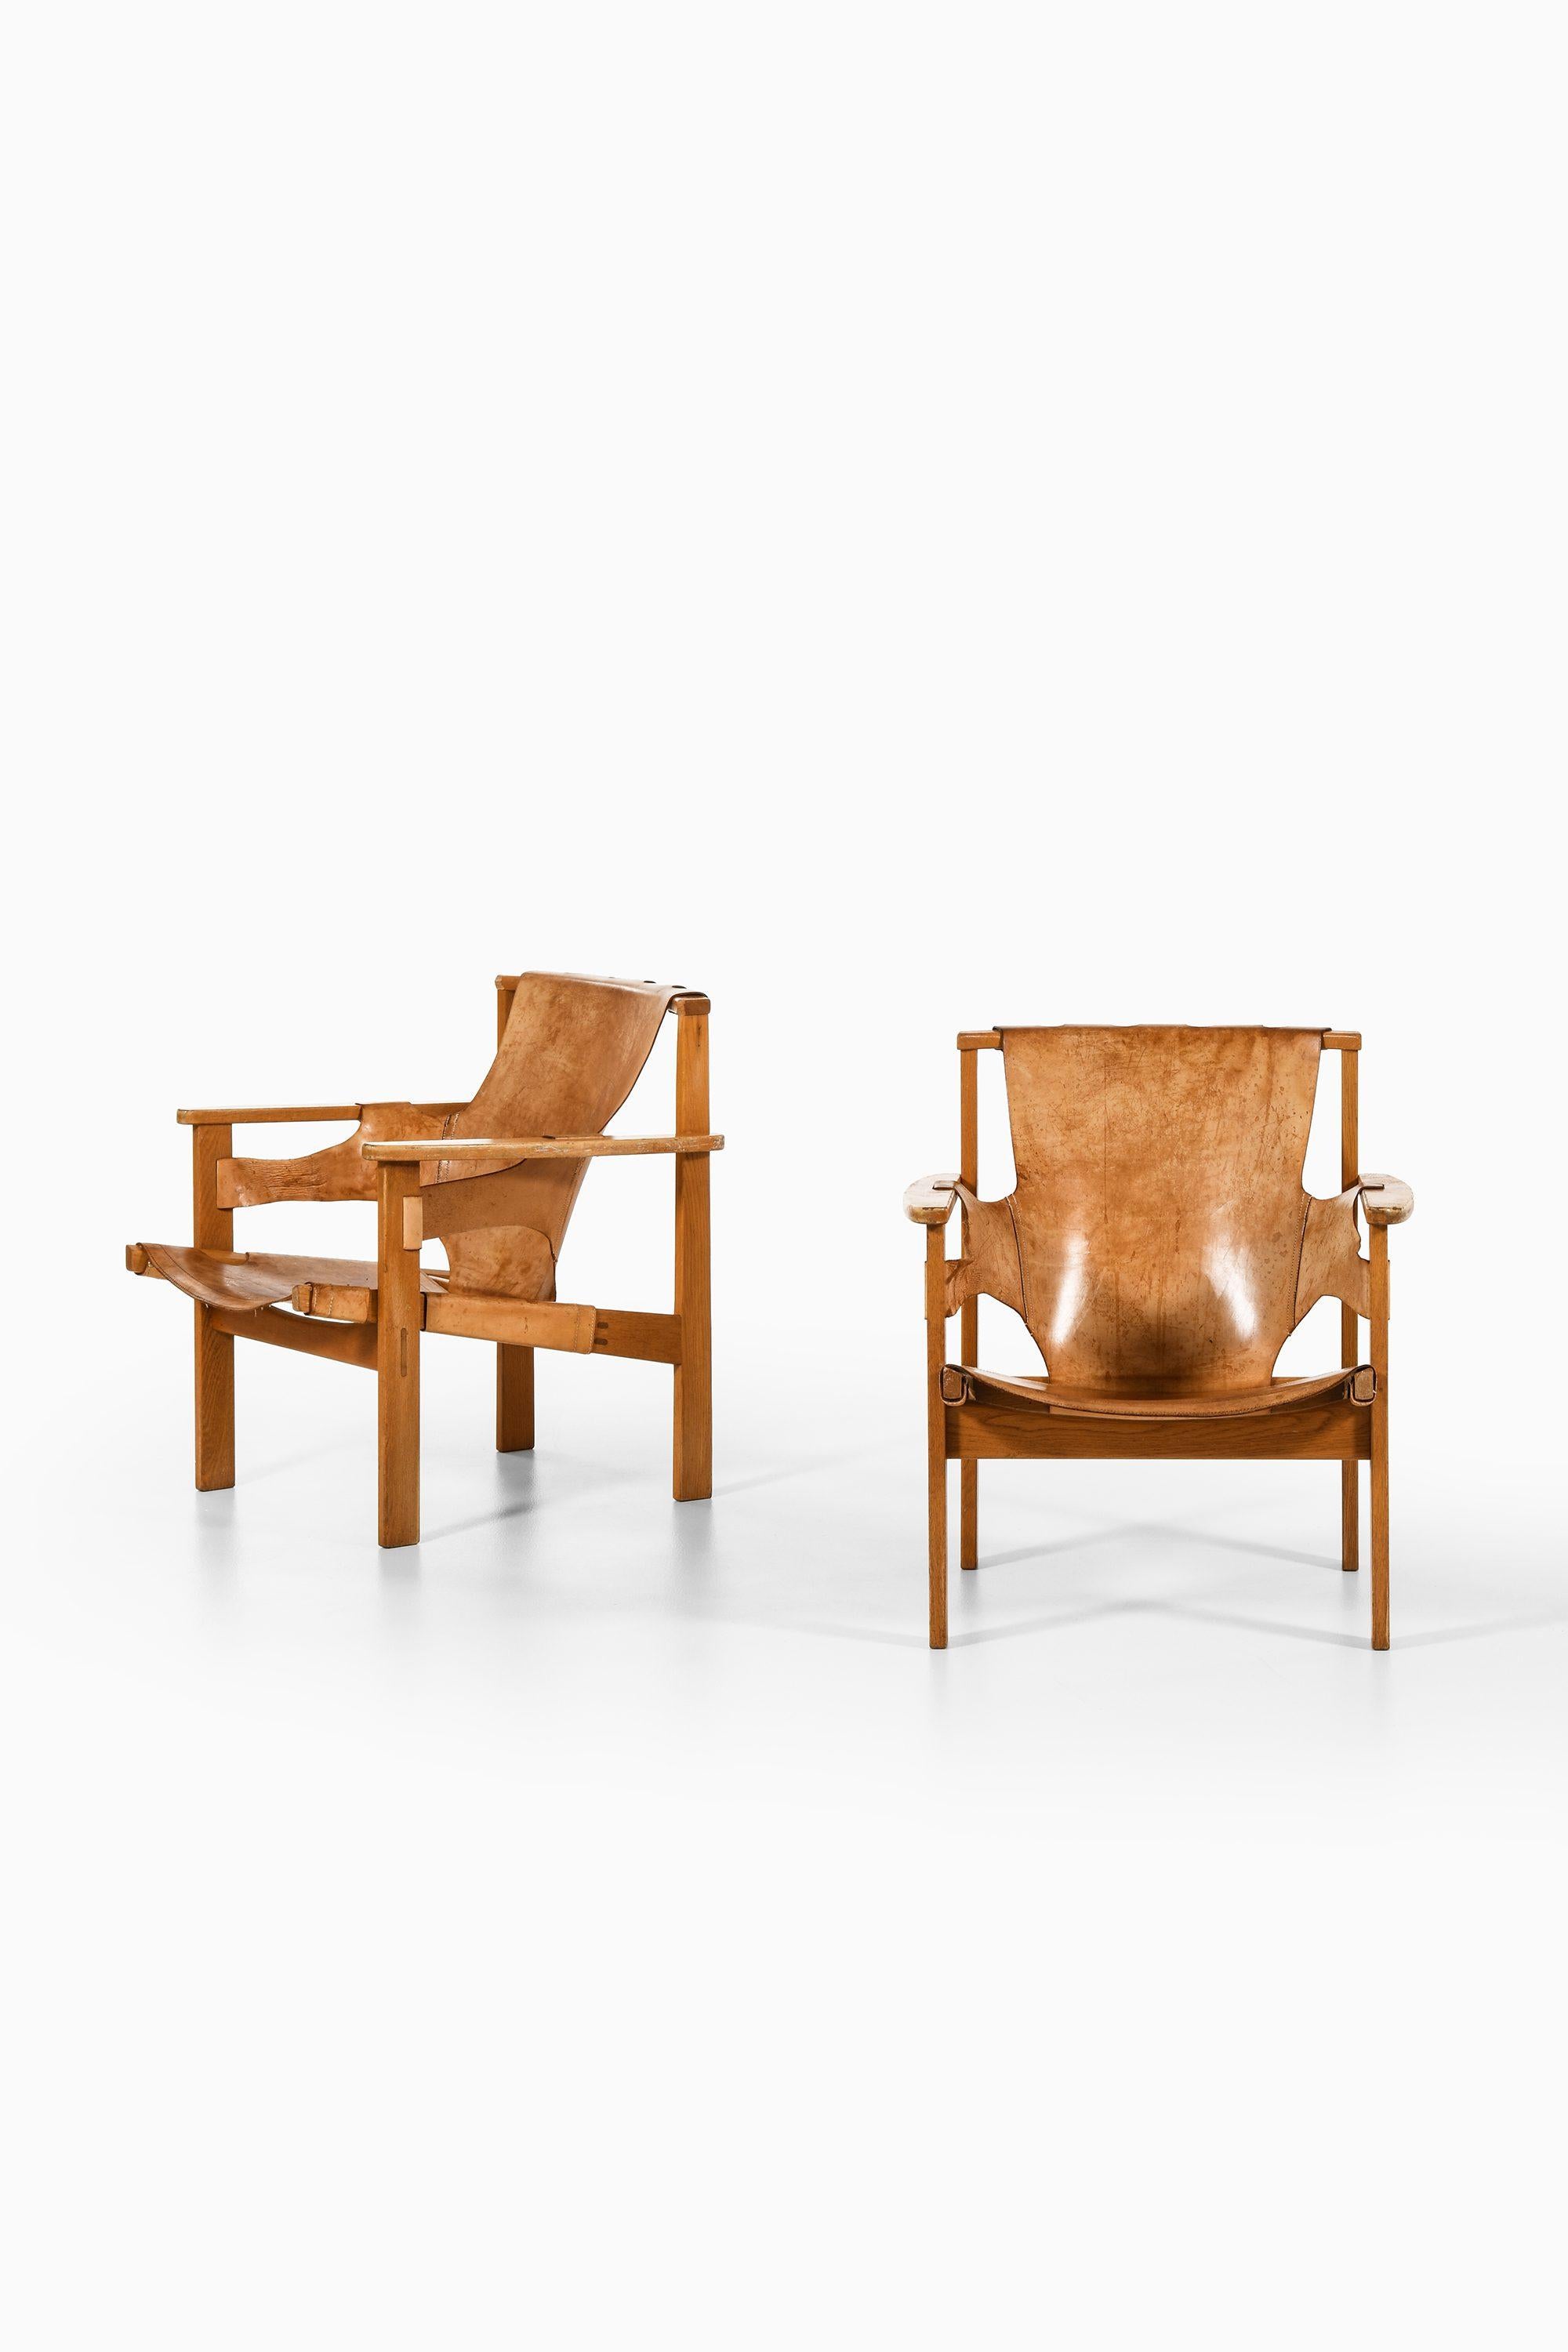 Pair of Trienna easy chairs in Oak and original leather by Carl-Axel Acking, 1957.

Additional Information:
Material: Oak and original leather.
Style: Midcentury, Scandinavian.
Produced by Nordiska Kompaniet in Sweden.
Dimensions (W x D x H):